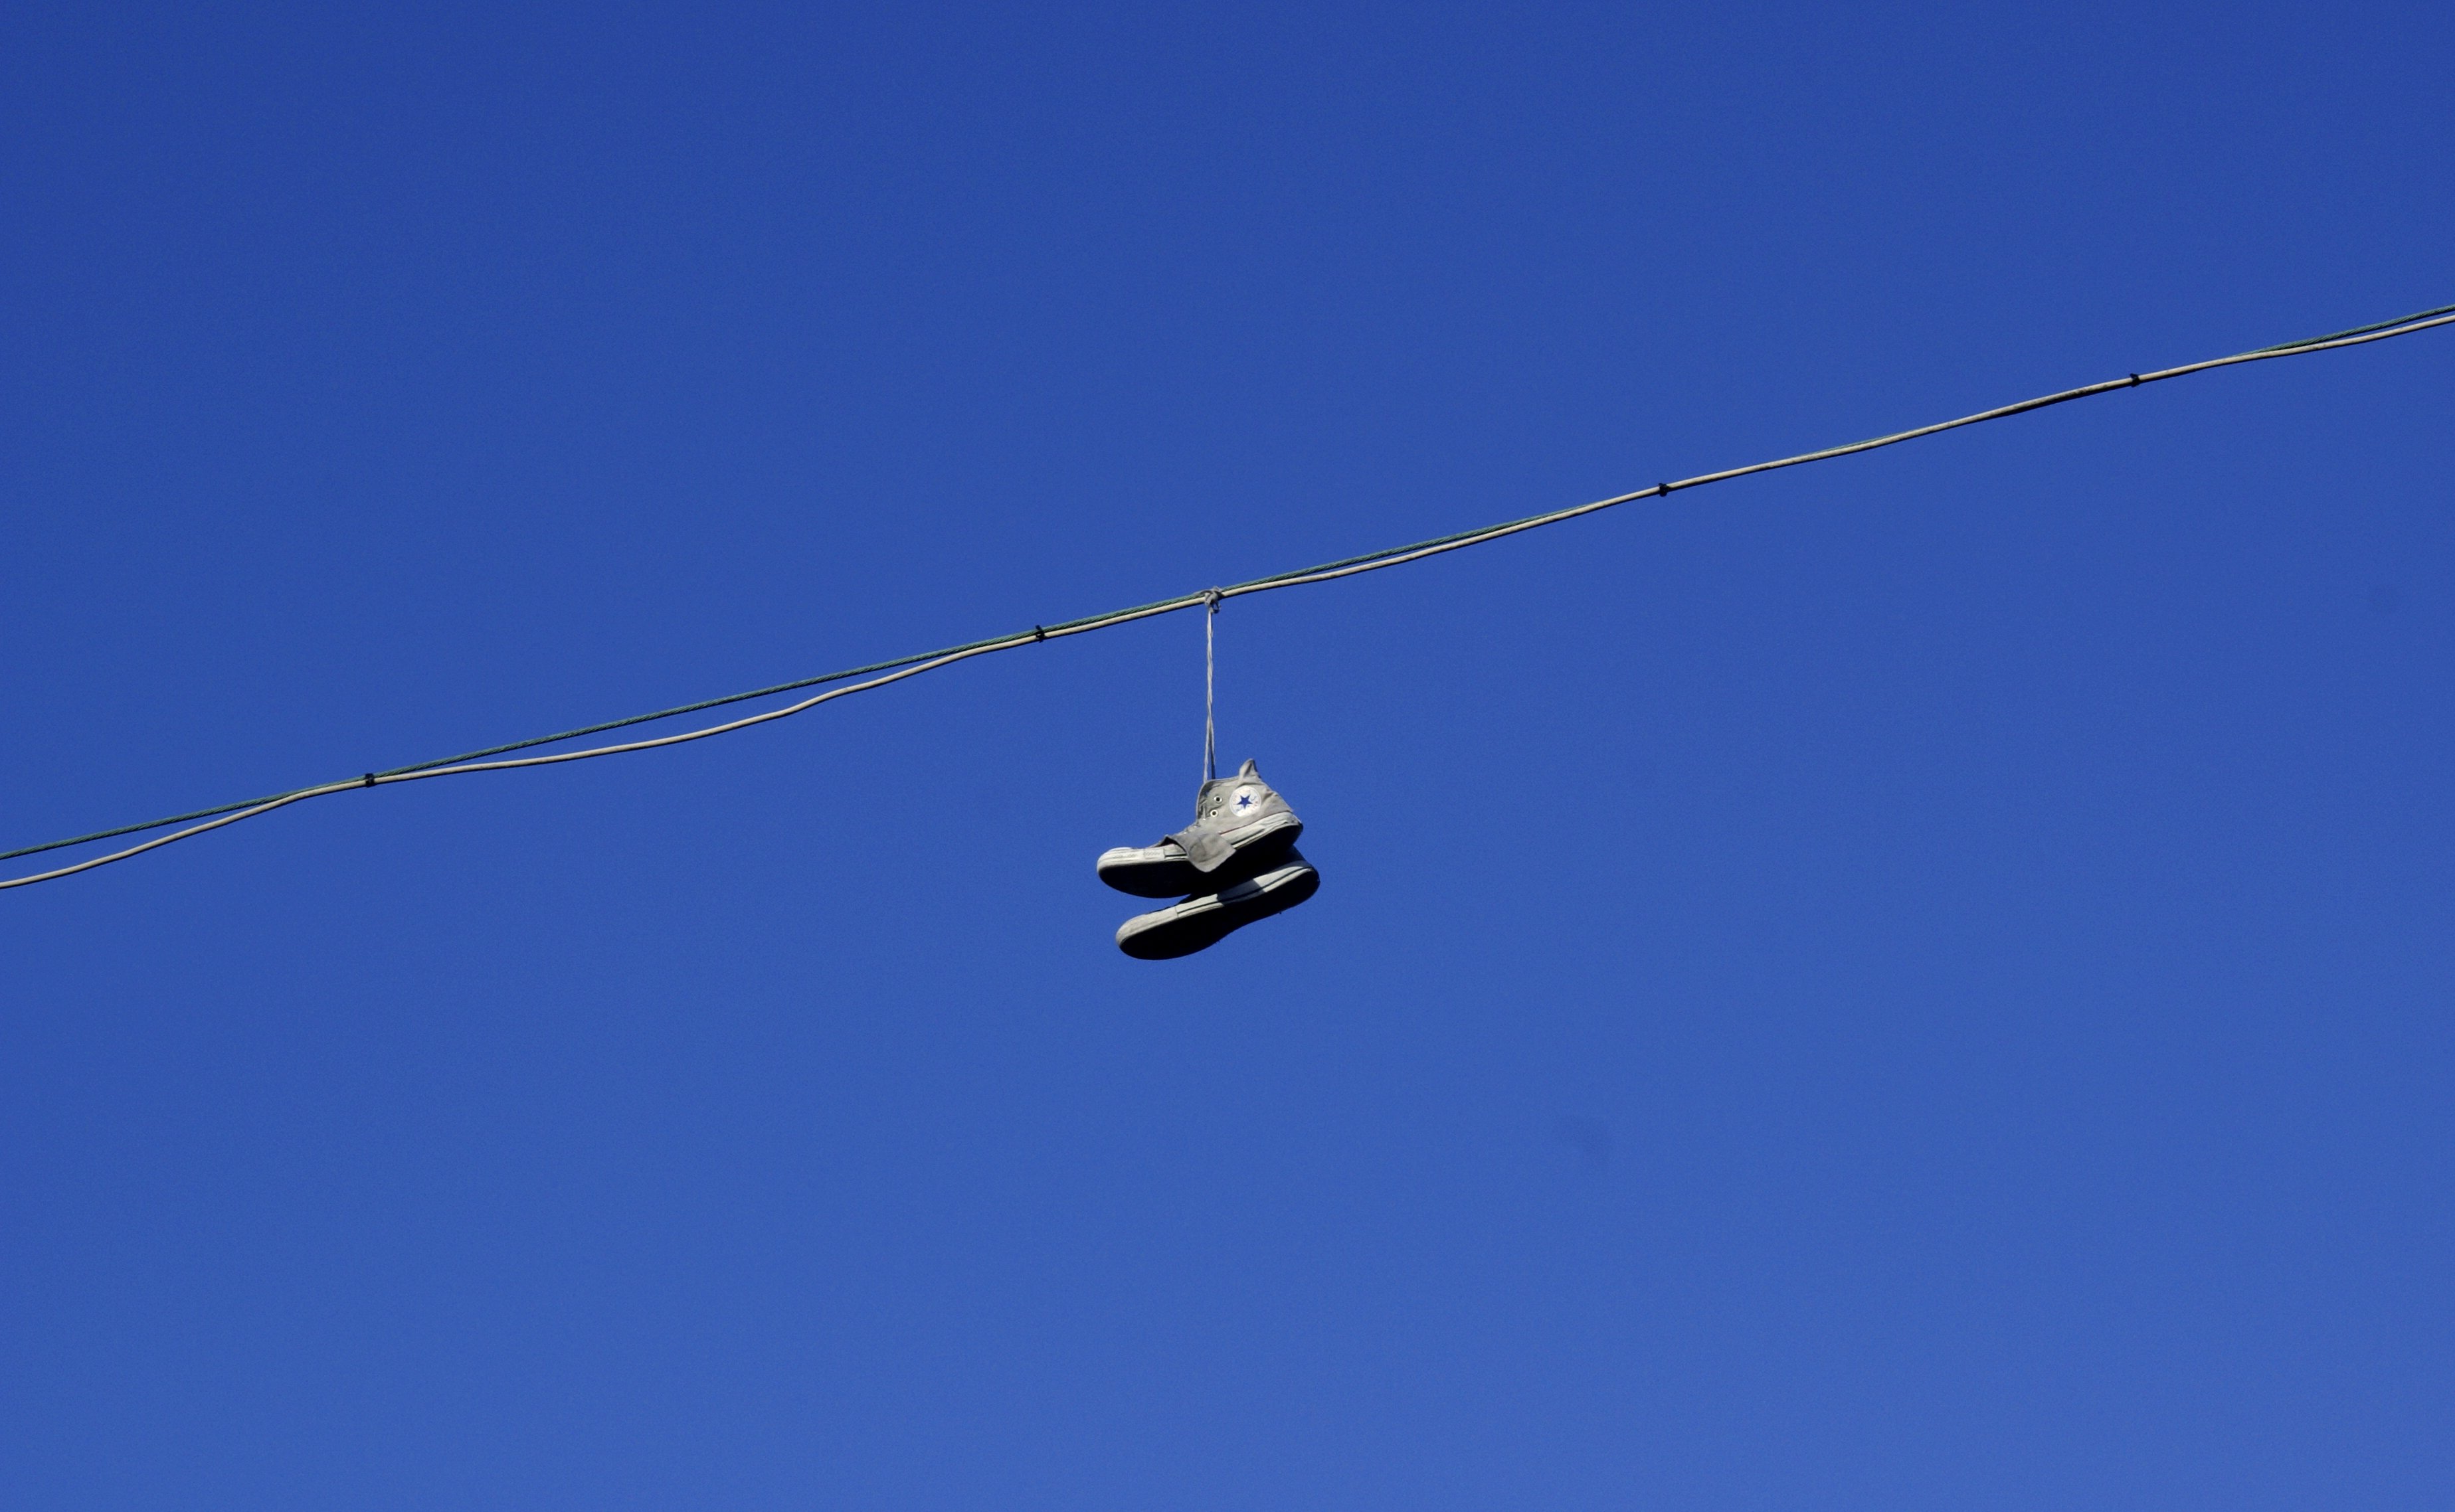 File:Shoes in telephone wire.jpg - Wikimedia Commons